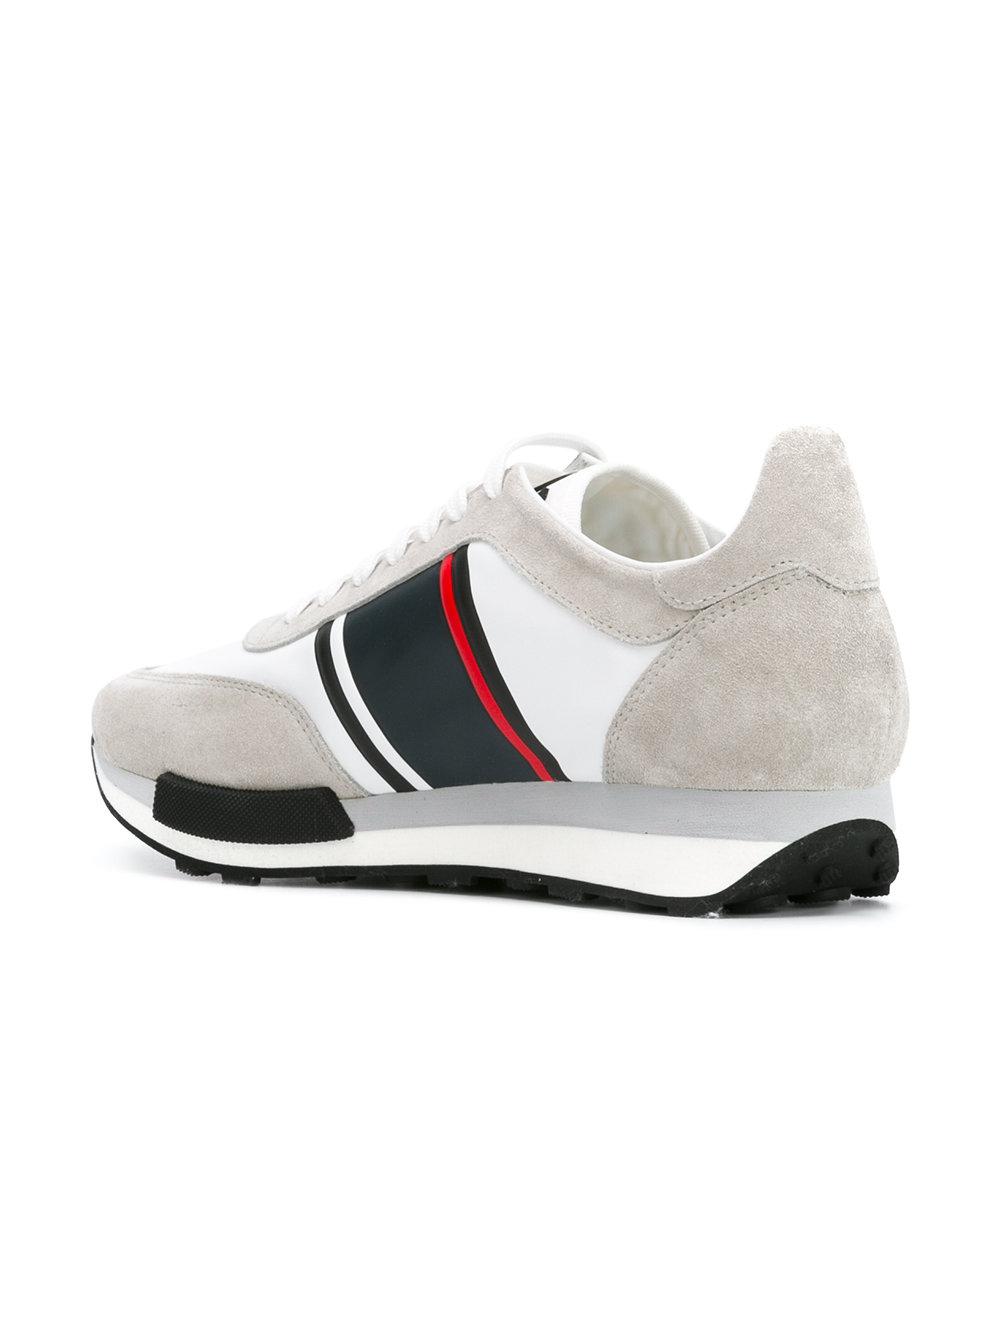 Lyst - Moncler Horace Sneakers in White for Men